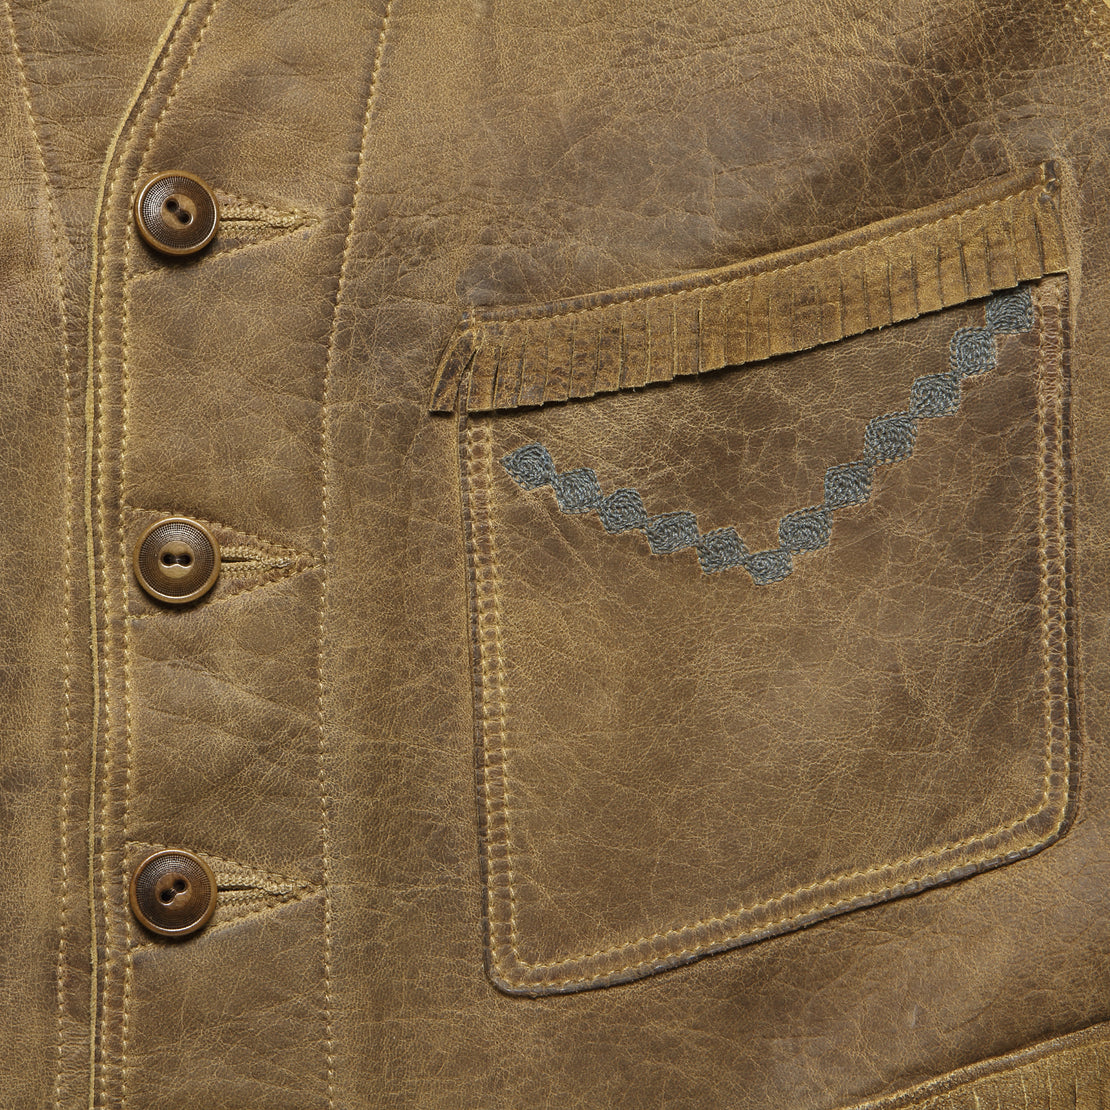 Hallwill Embroidered Suede Vest -  Tan/Khaki - RRL - STAG Provisions - Outerwear - Vest